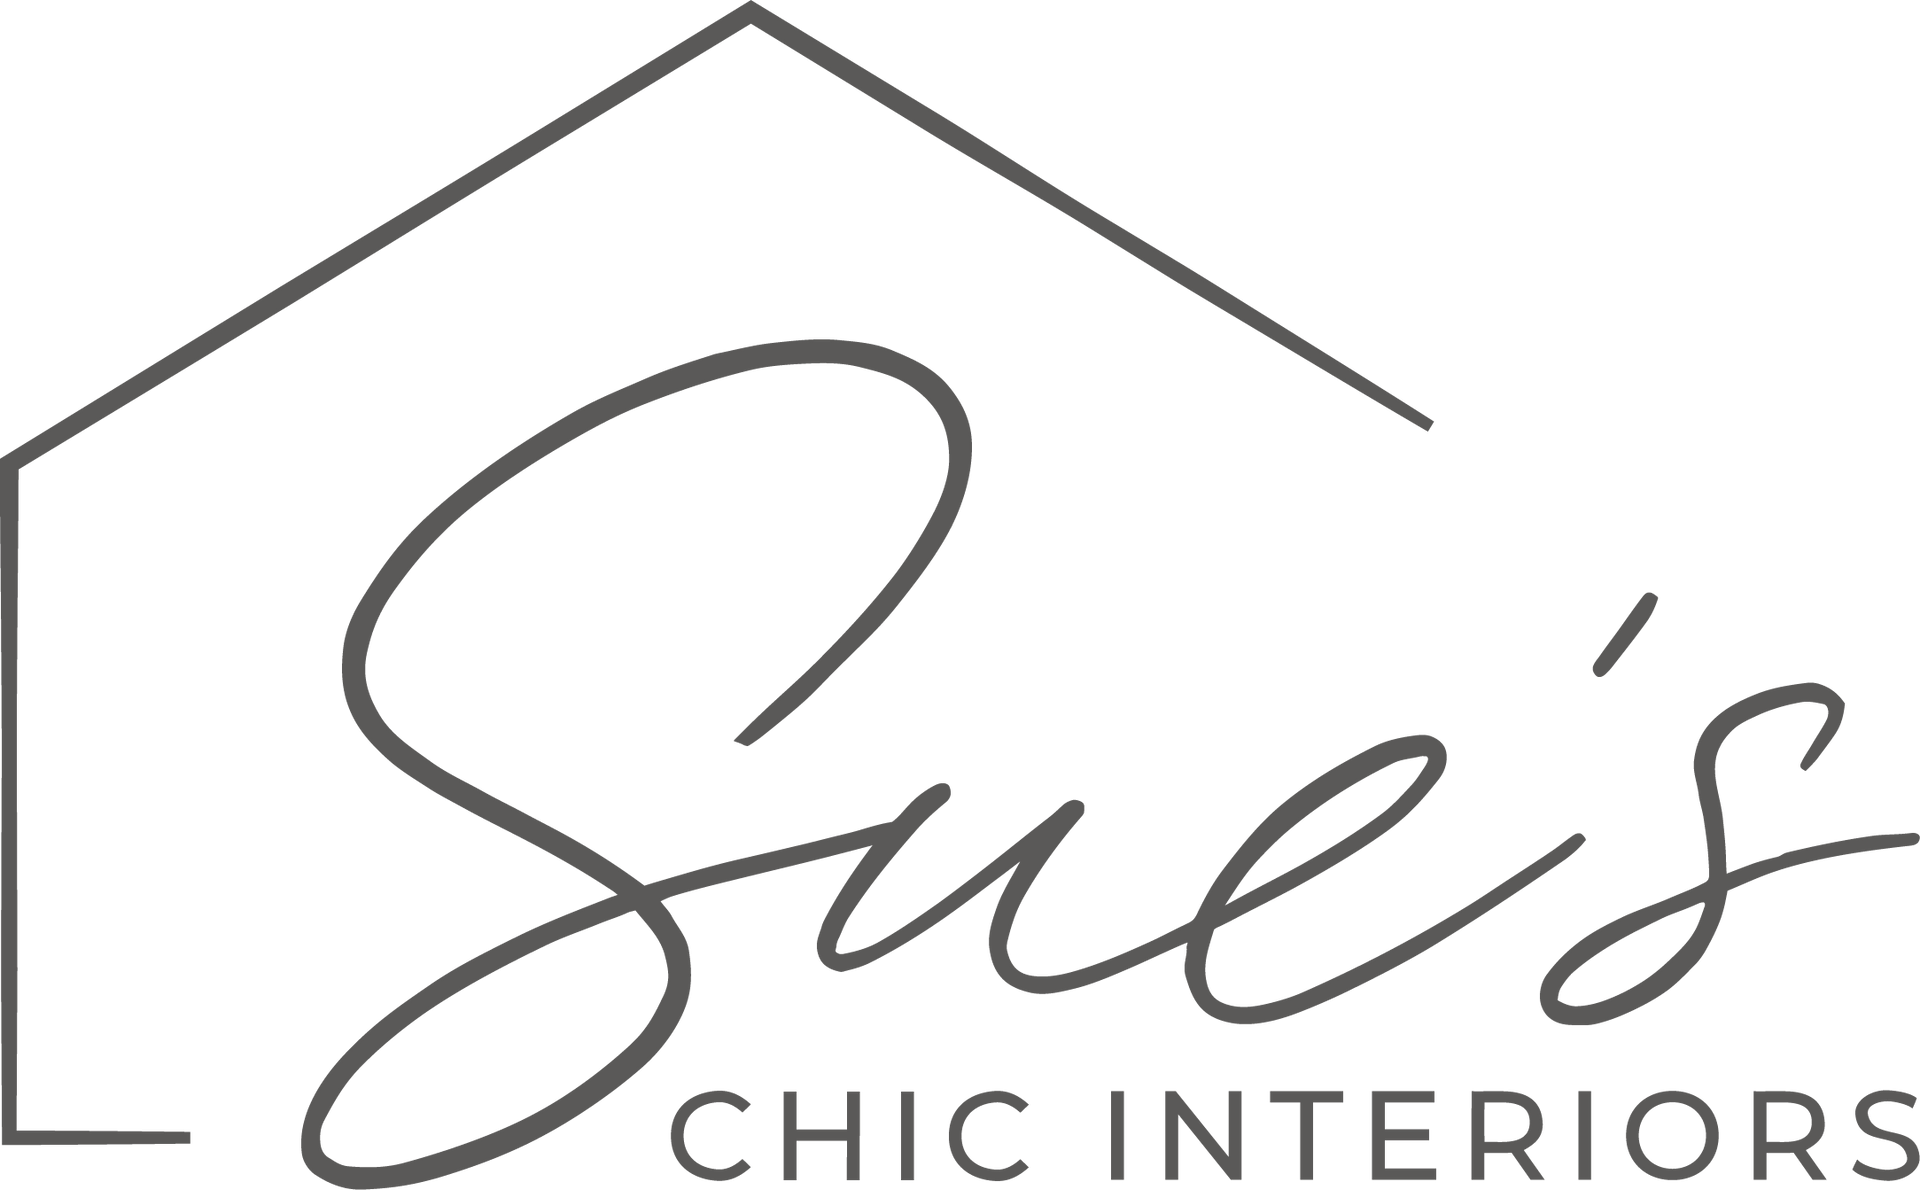 A black and white logo for sue 's chic interiors.